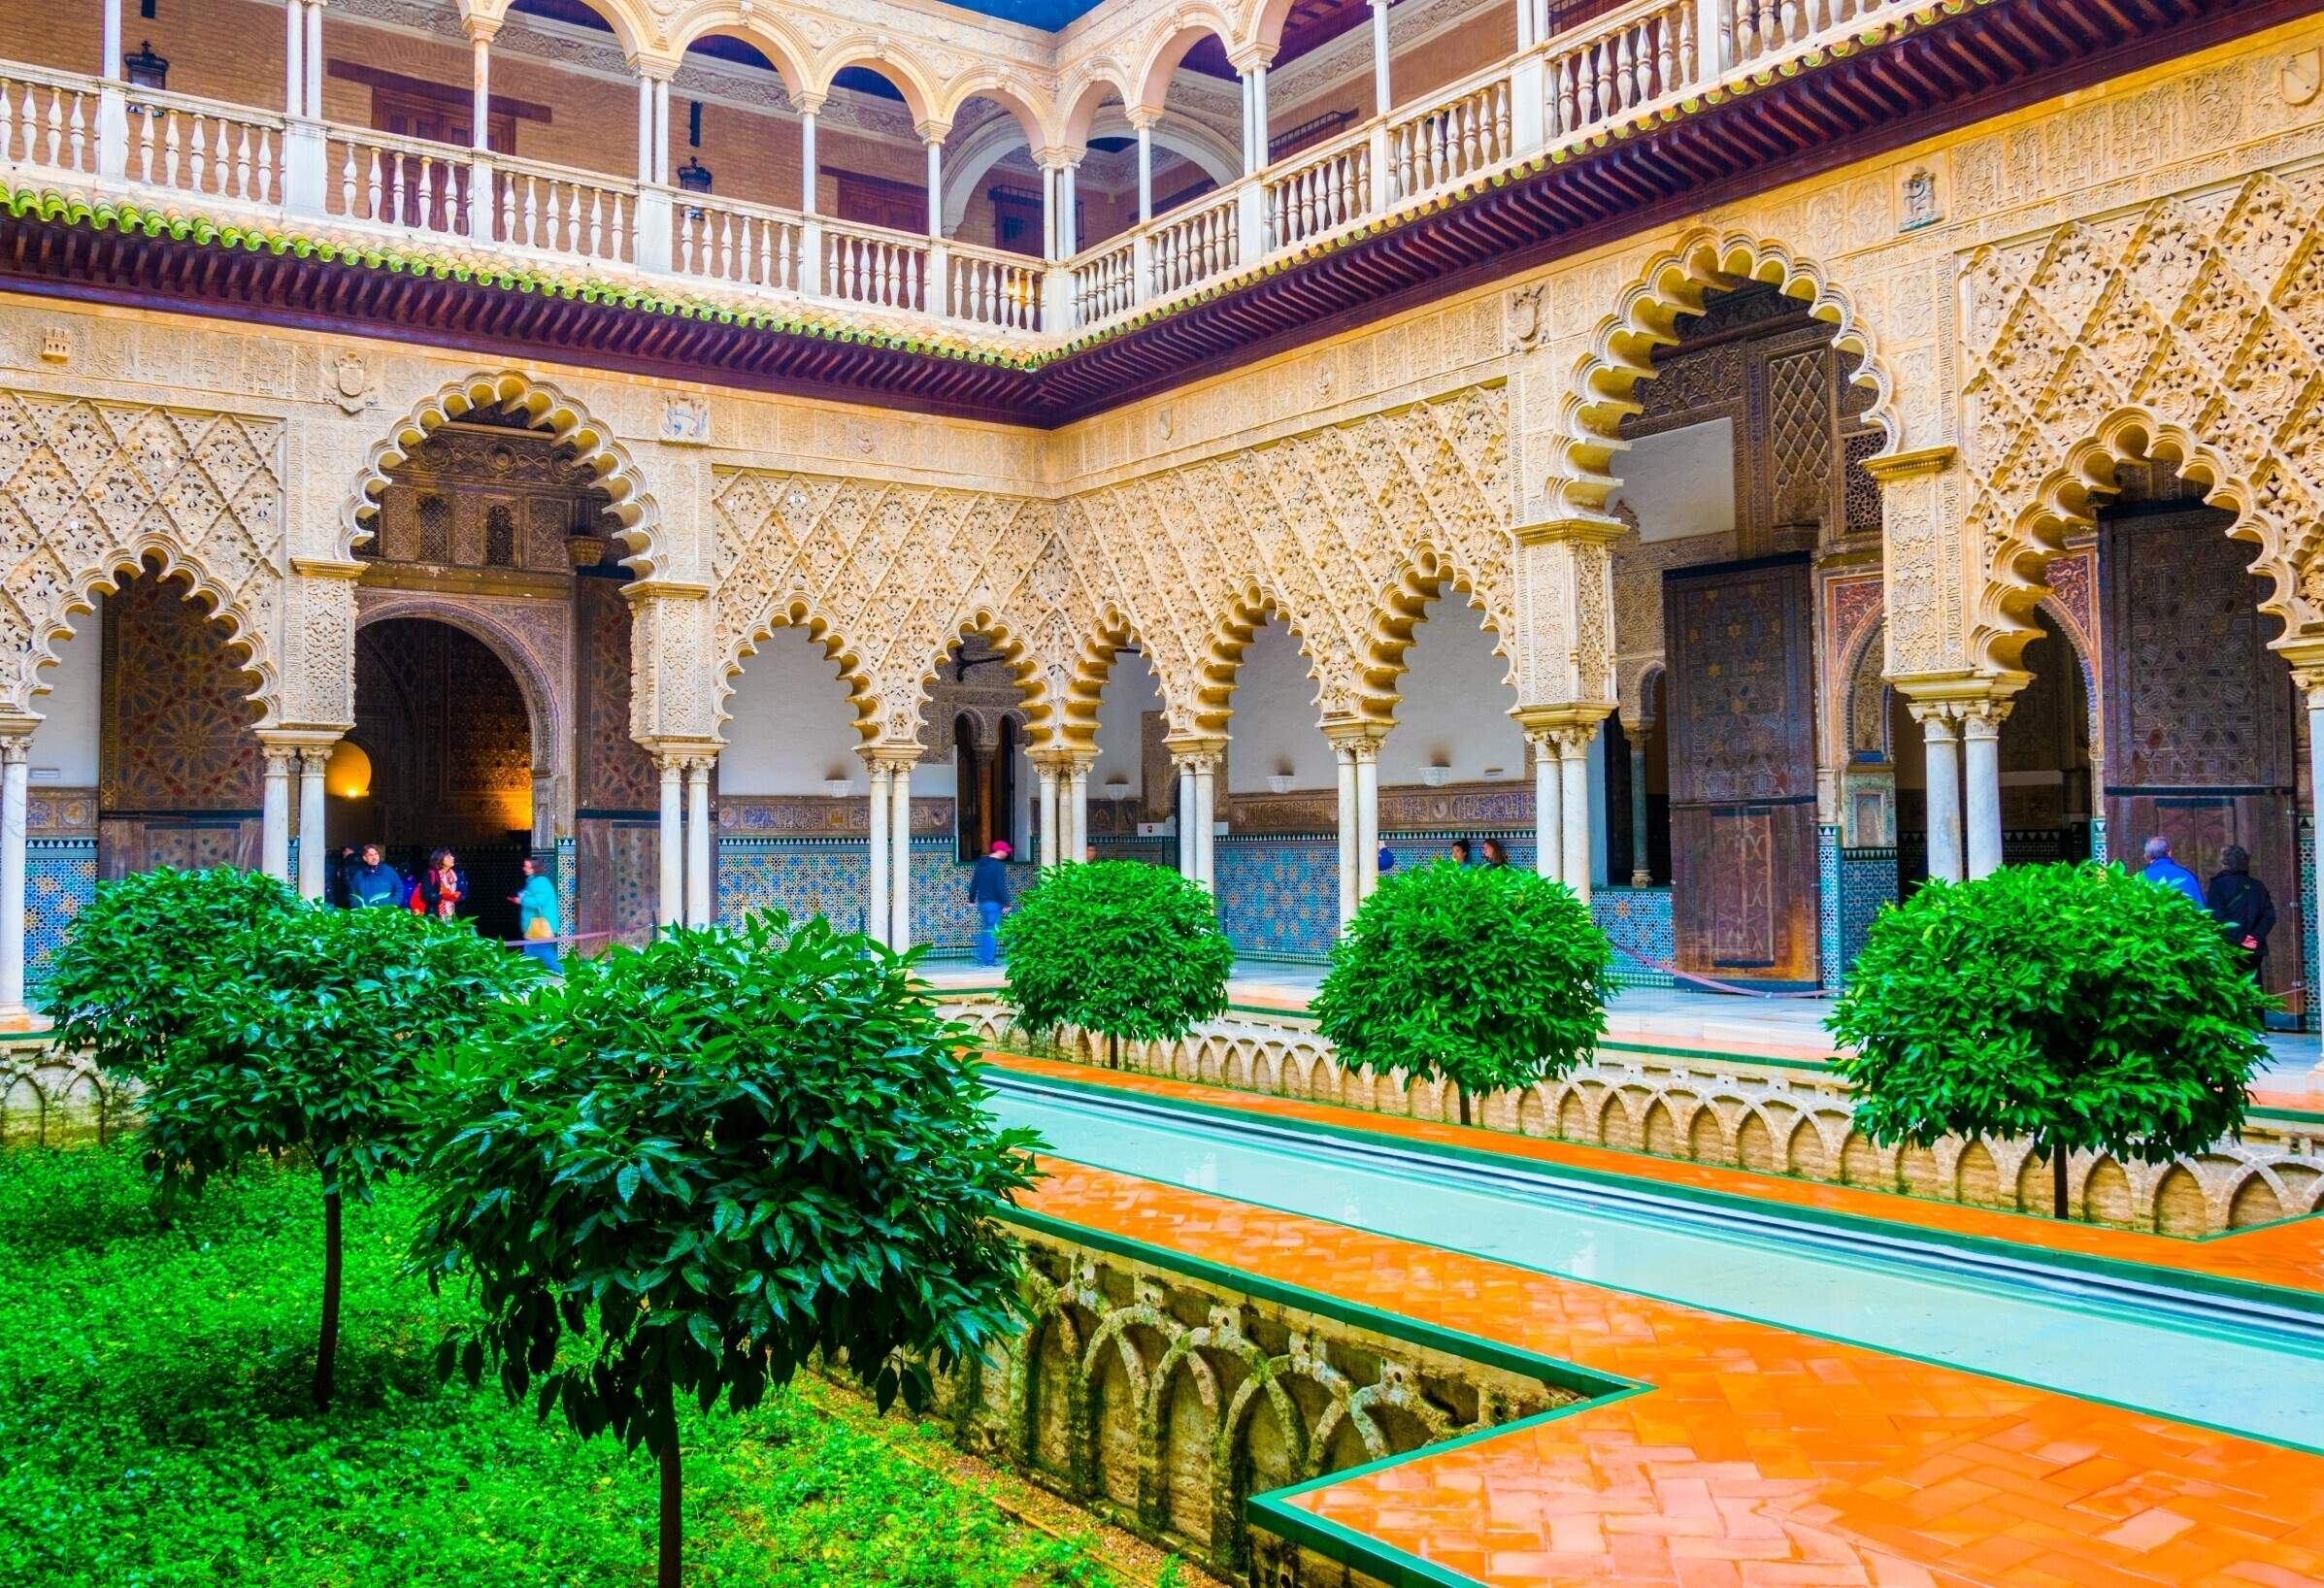 A fascinating Courtyard of the Maidens at Royal Alcazars with a long pool alongside an intricate patio.